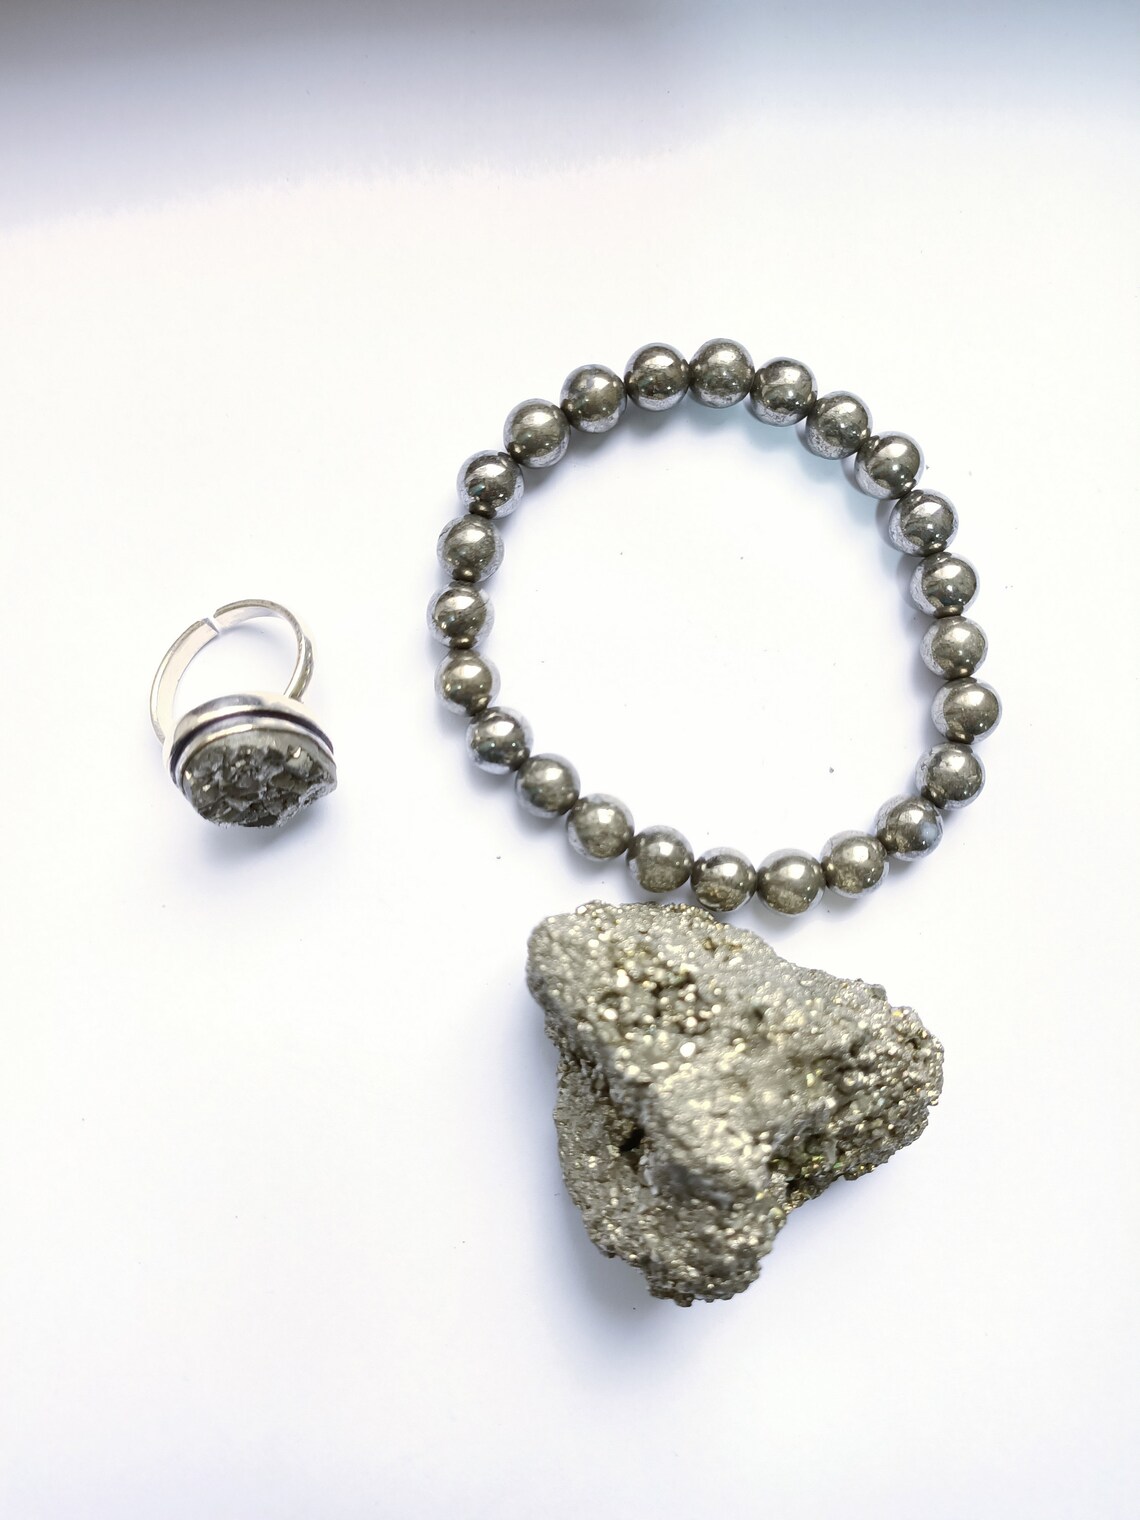 Pyrite Stone for wealth and abundance, Money attracting 1 Pyrite bracelet , Pyrite Ring and 100 GM raw pyrite stone